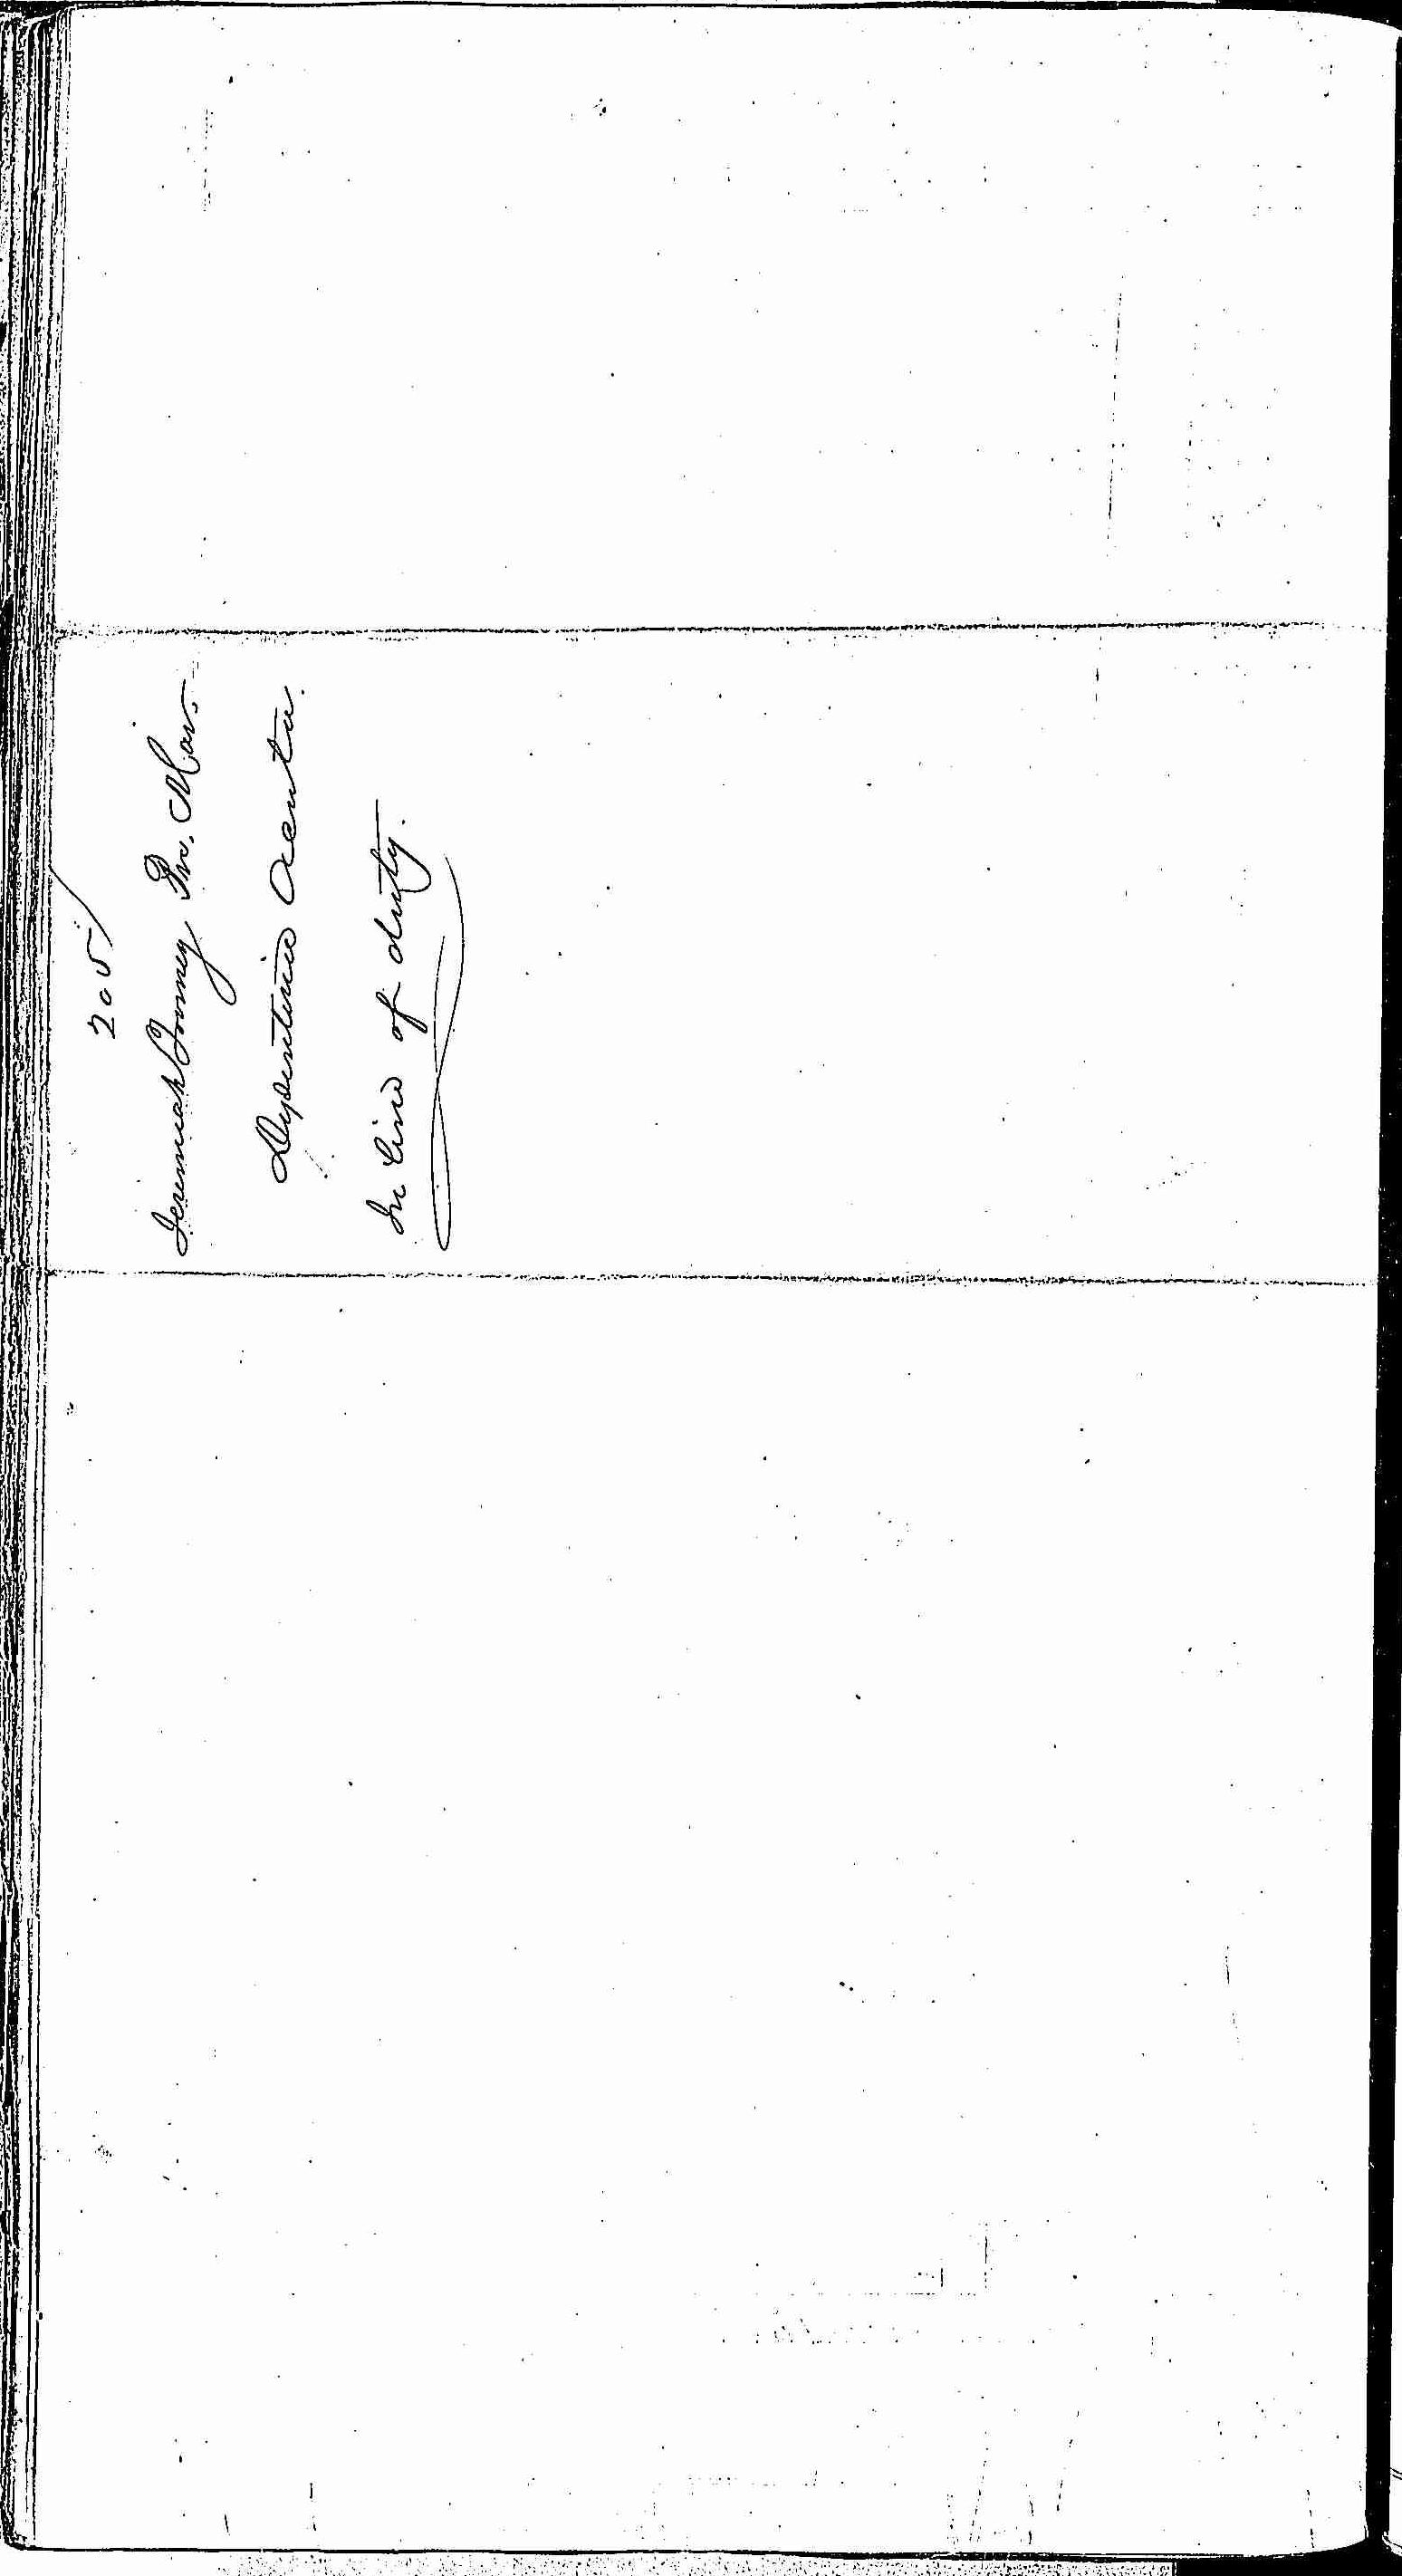 Entry for Jeremiah Tomey (page 2 of 2) in the log Hospital Tickets and Case Papers - Naval Hospital - Washington, D.C. - 1866-68